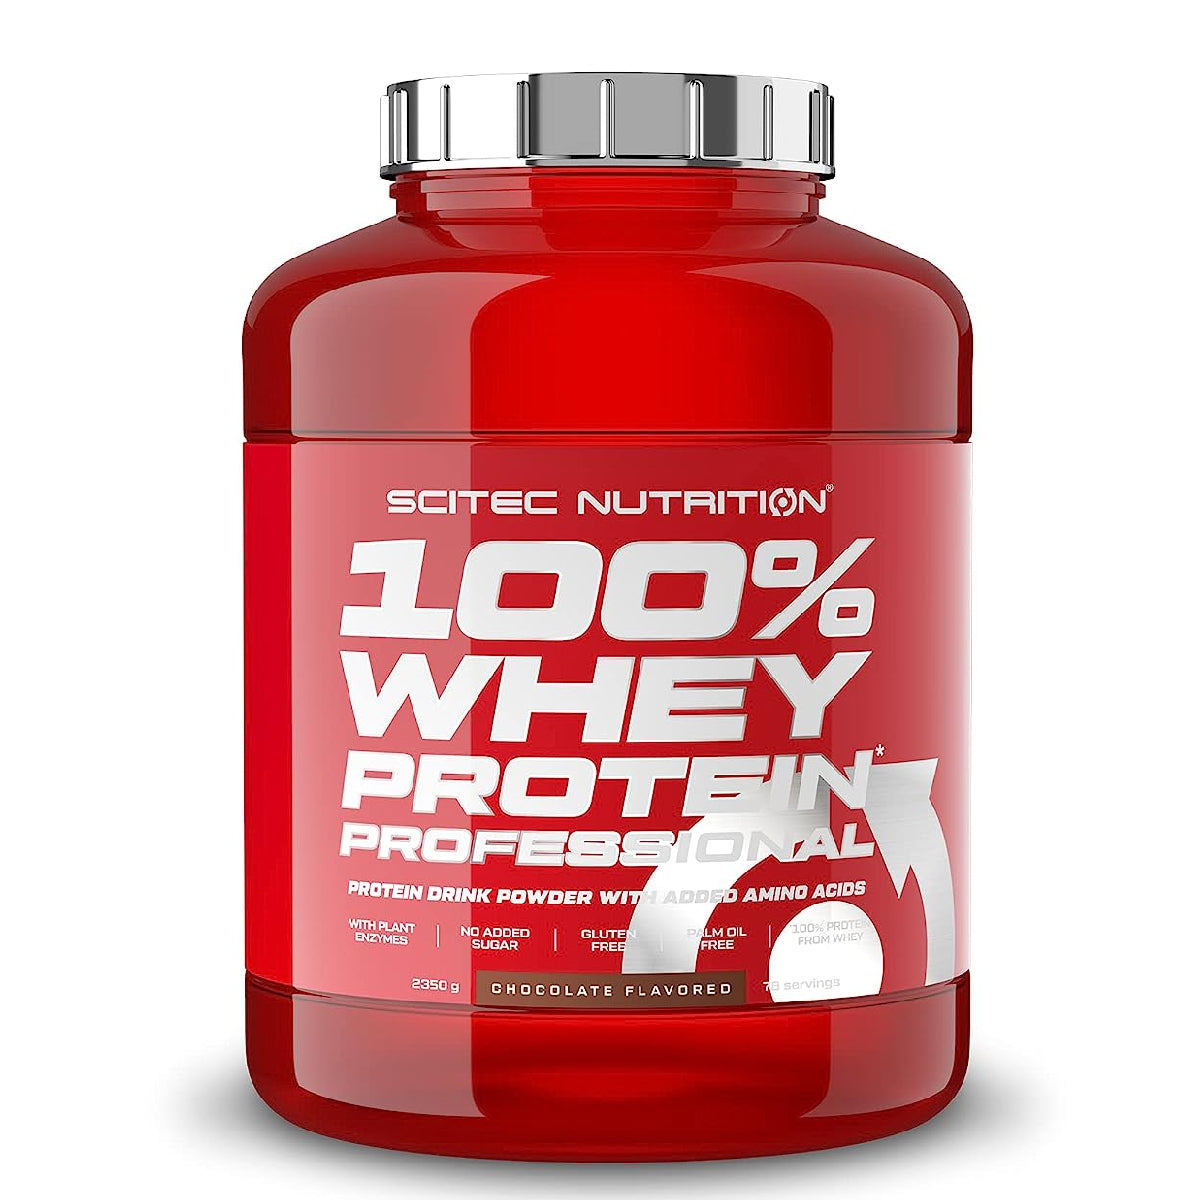 Scitec Nutrition 100% whey Protein Professional